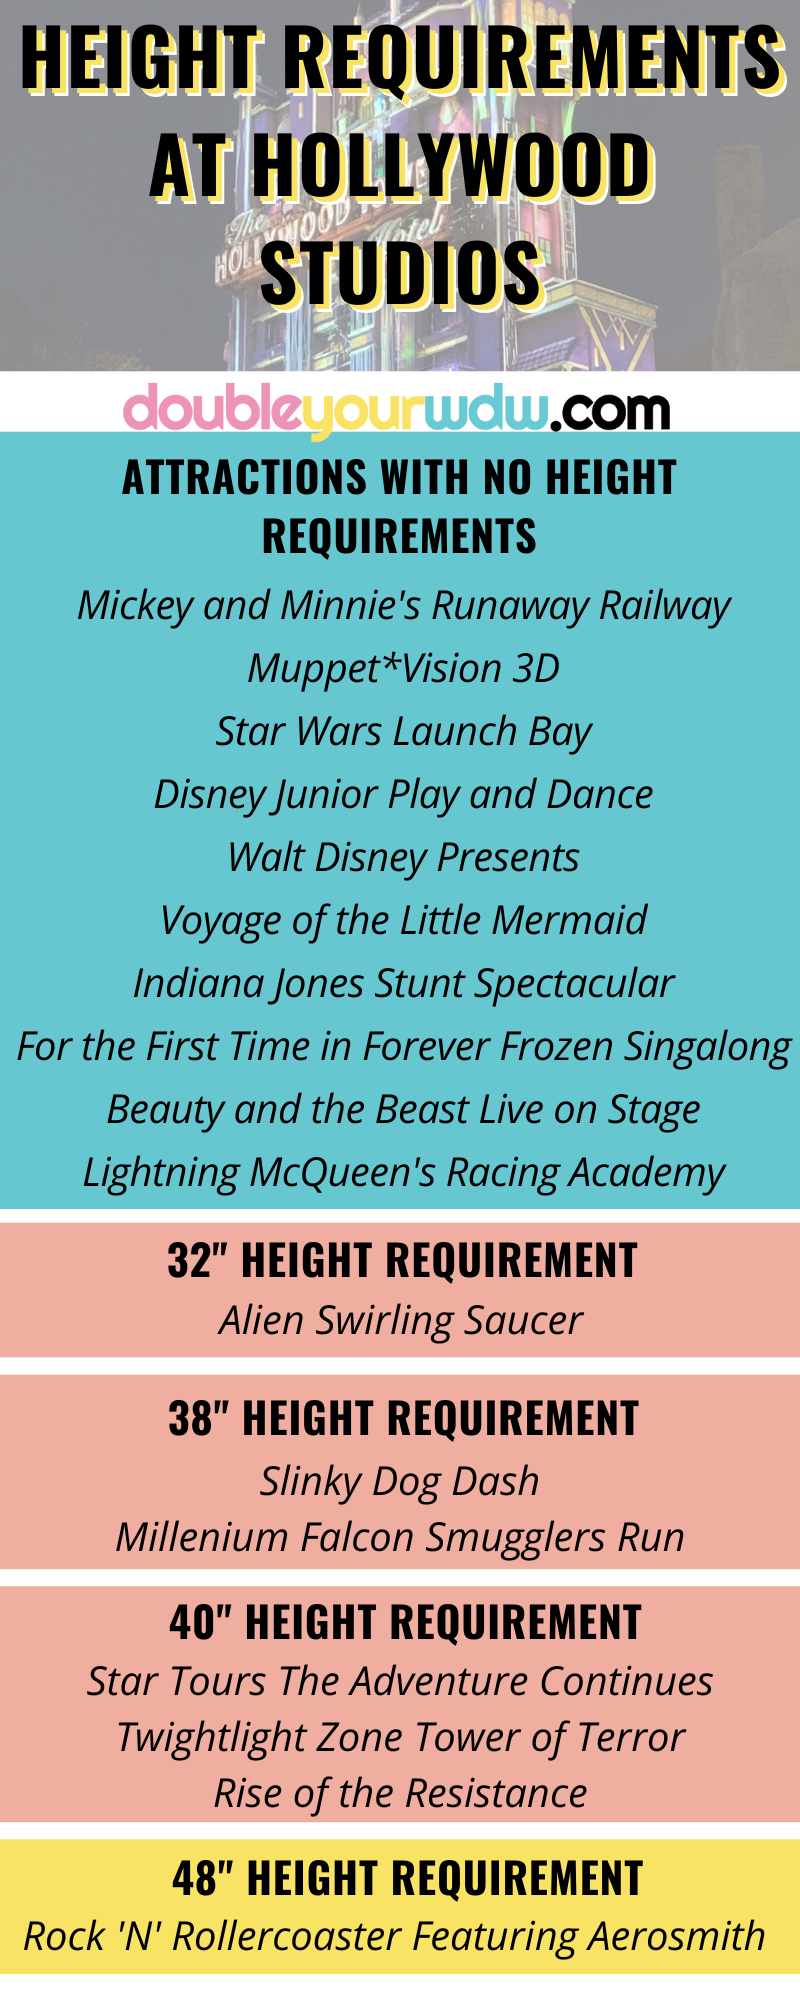 Hollywood Studios Complete Ride List at Disney World Double Your WDW